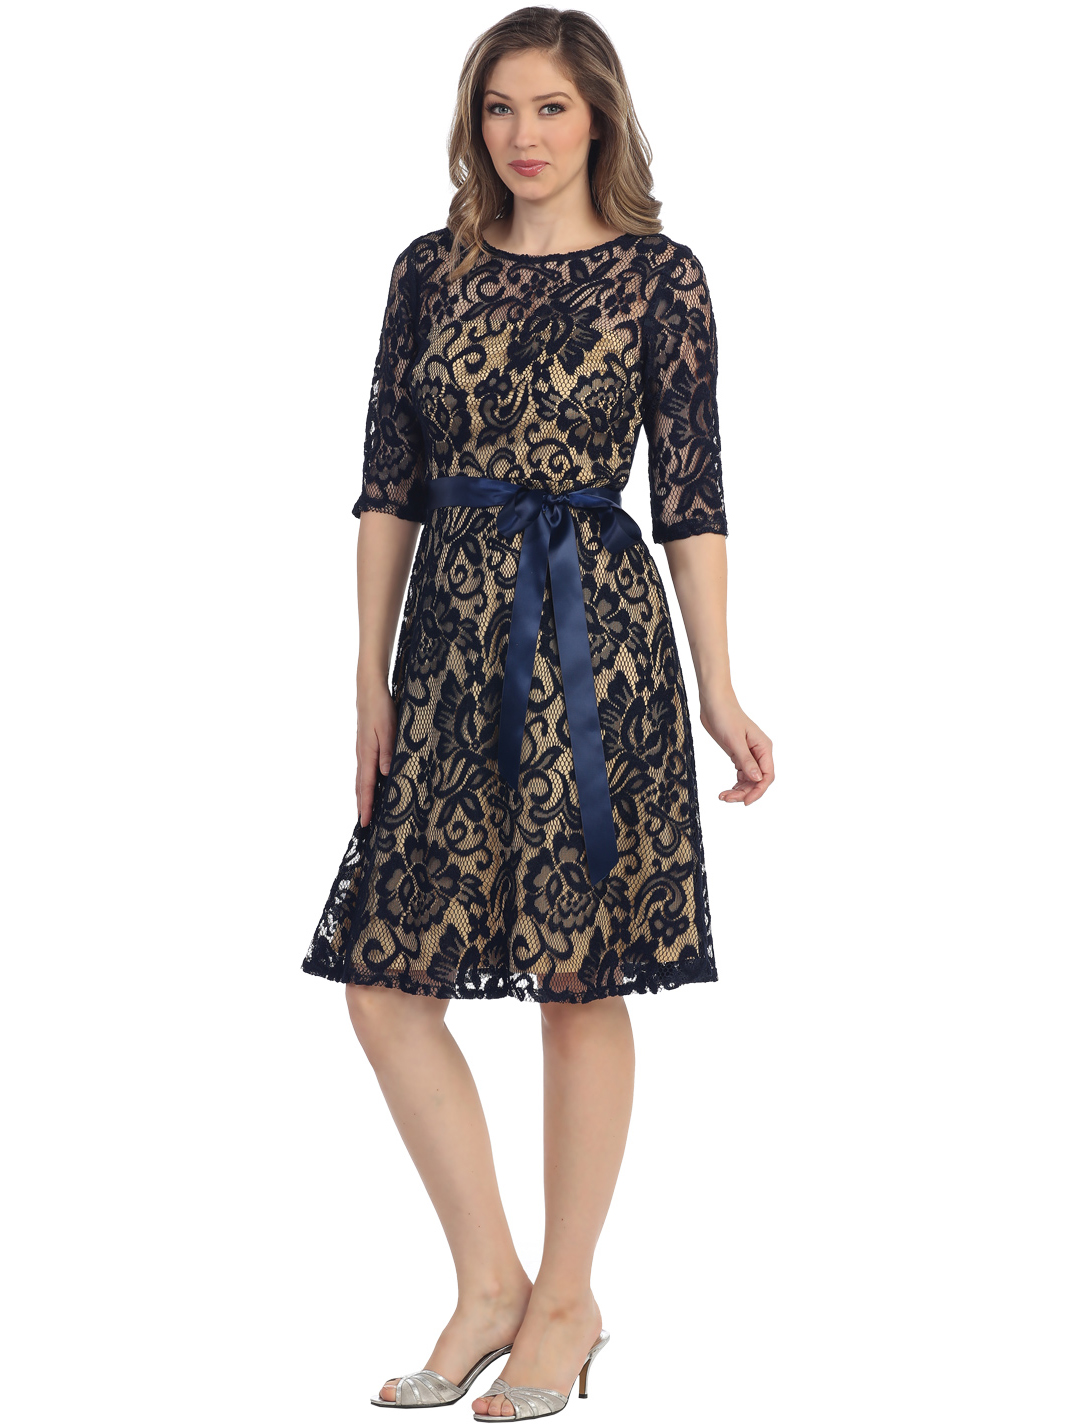 Navy And Gold Lace Dress : Things To Know